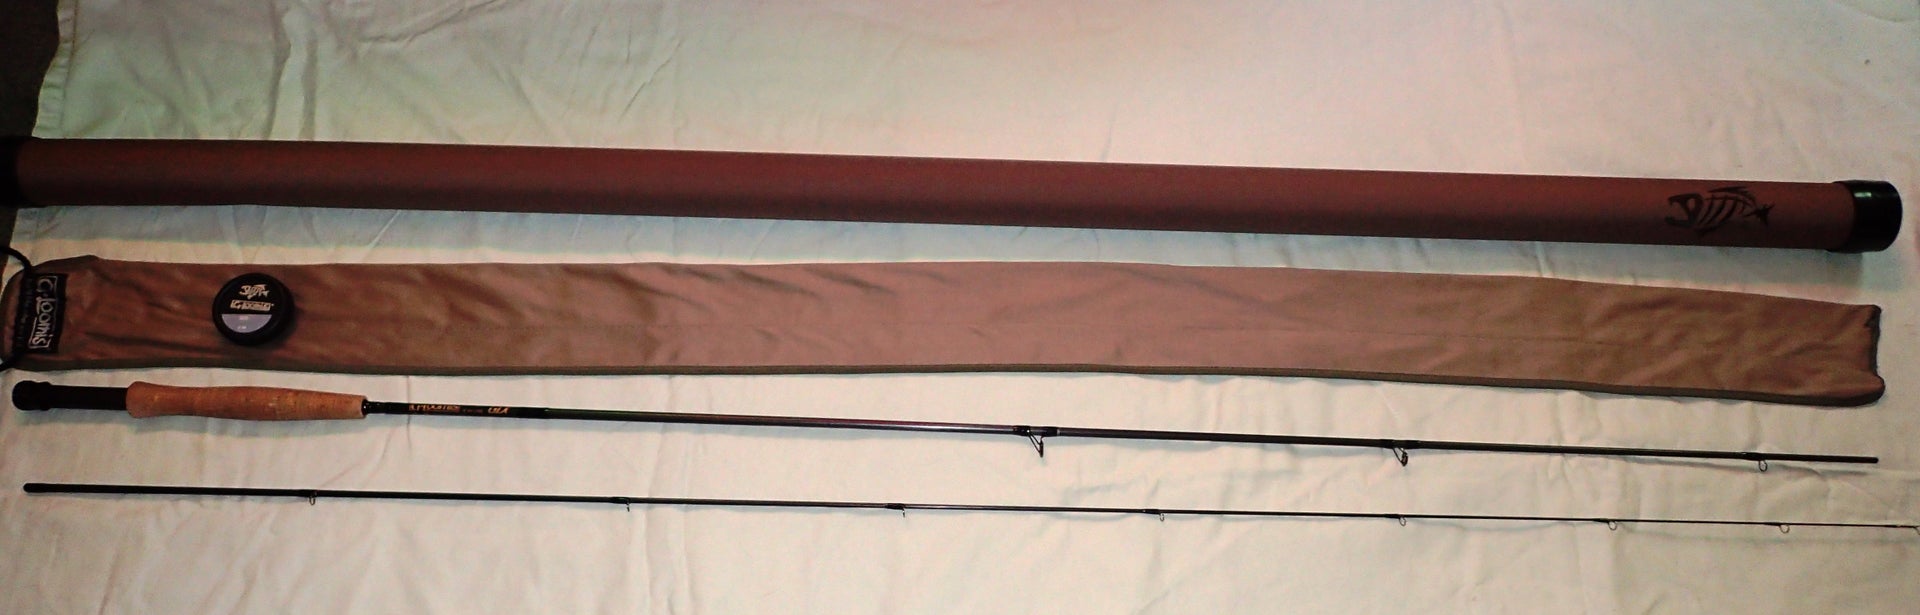 G Loomis GLX Classic 9FT 4WT 2PC GREAT SHAPE **PRICE REDUCTION**